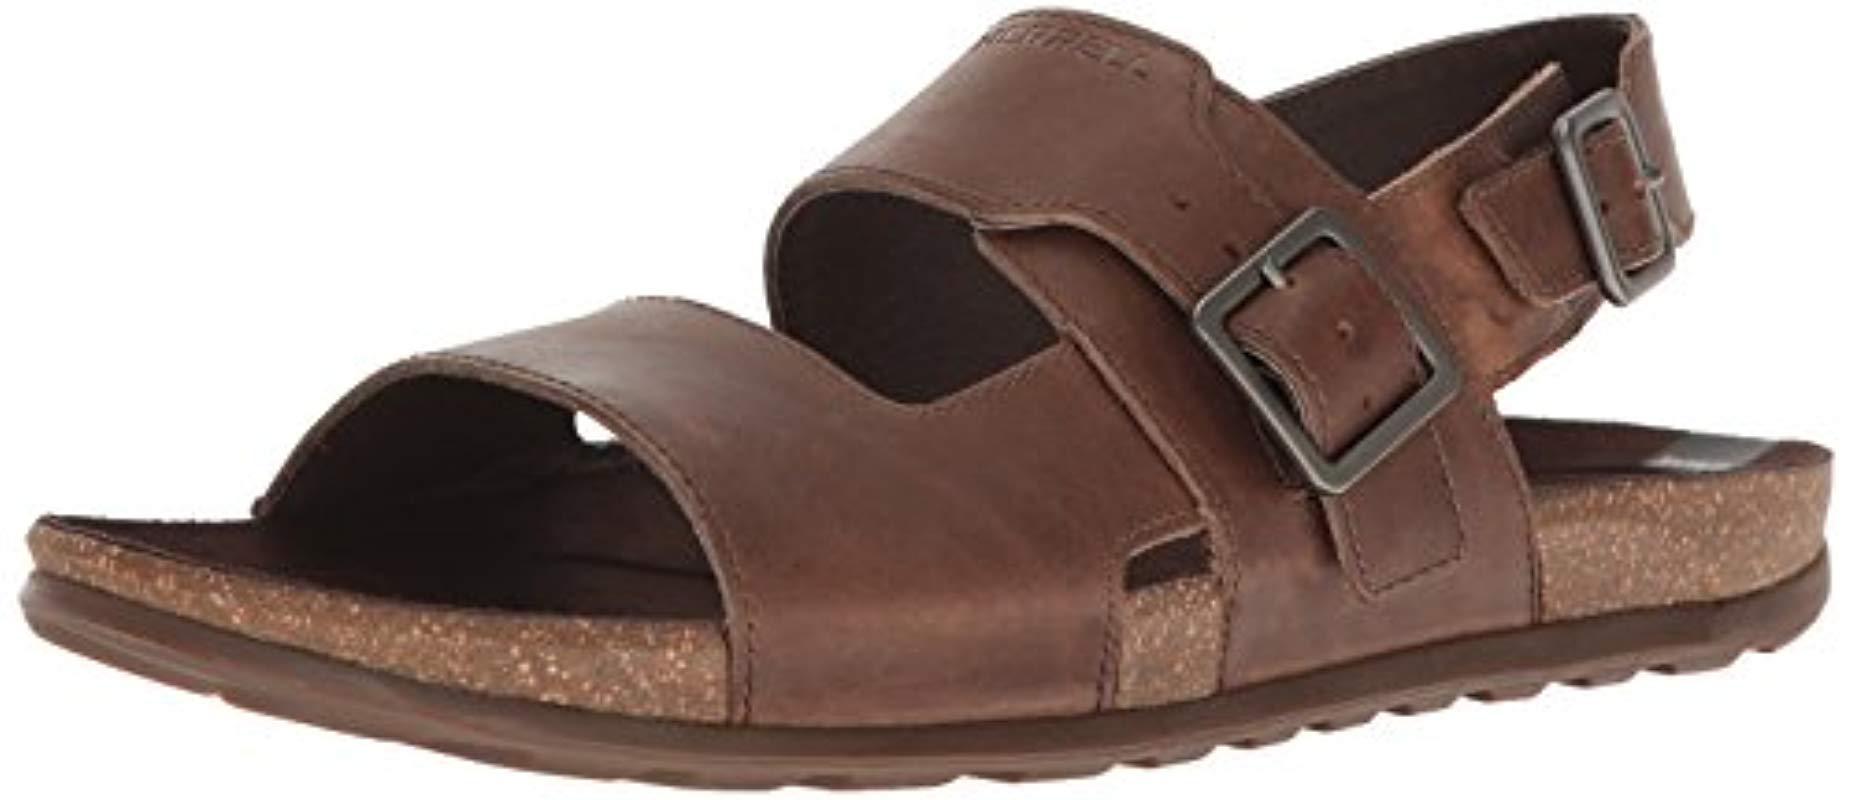 Lyst - Merrell Downtown Backstrap Buckle Sandal in Brown for Men - Save ...